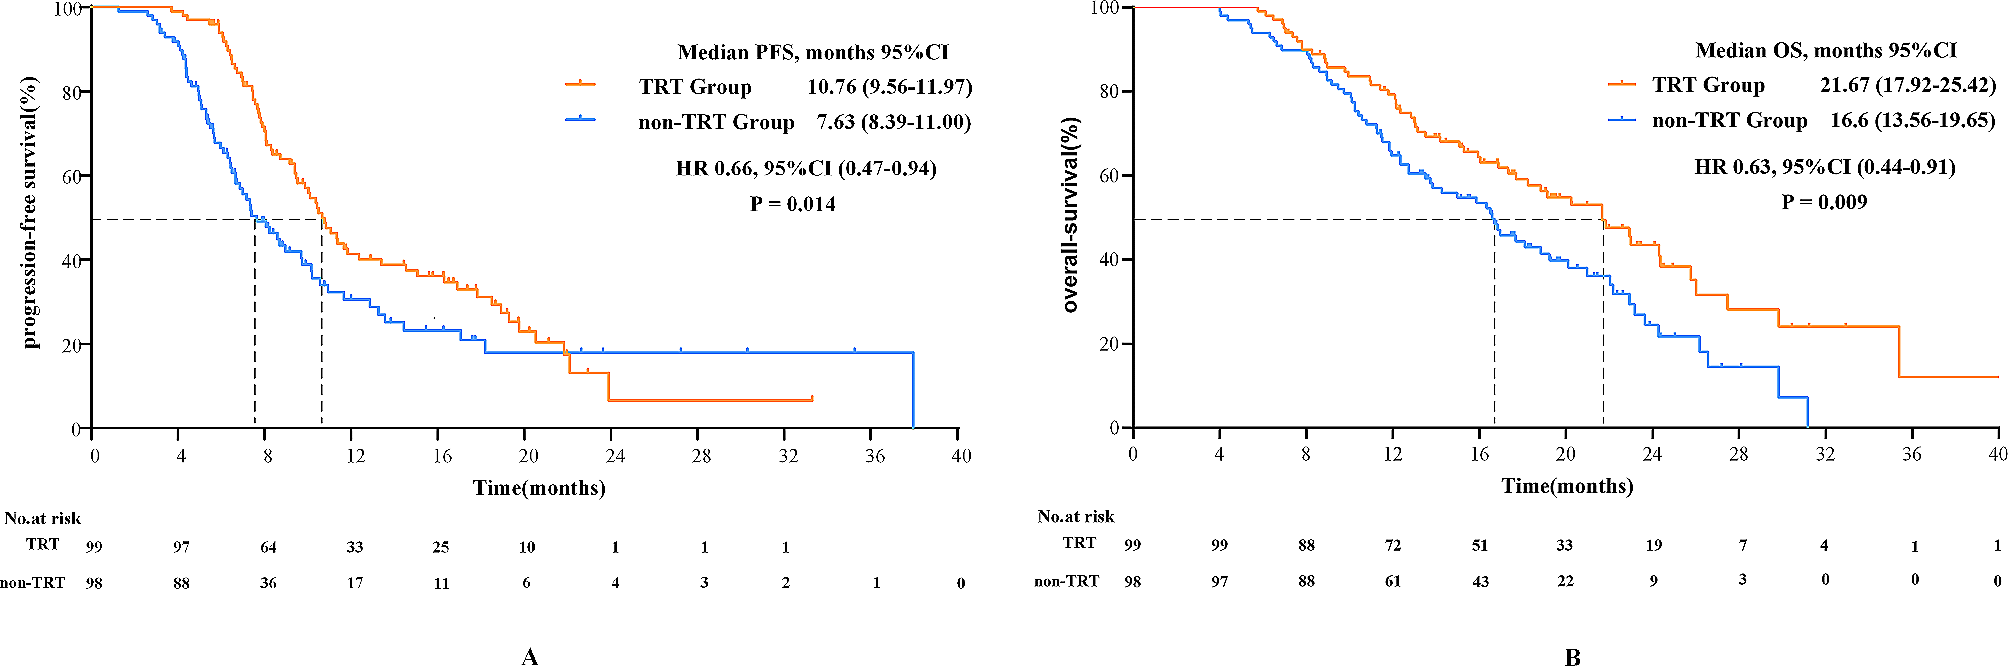 Efficacy and safety of thoracic radiotherapy in extensive-stage small-cell lung cancer patients receiving first-line immunotherapy plus chemotherapy: a propensity score matched multicentre retrospective analysis